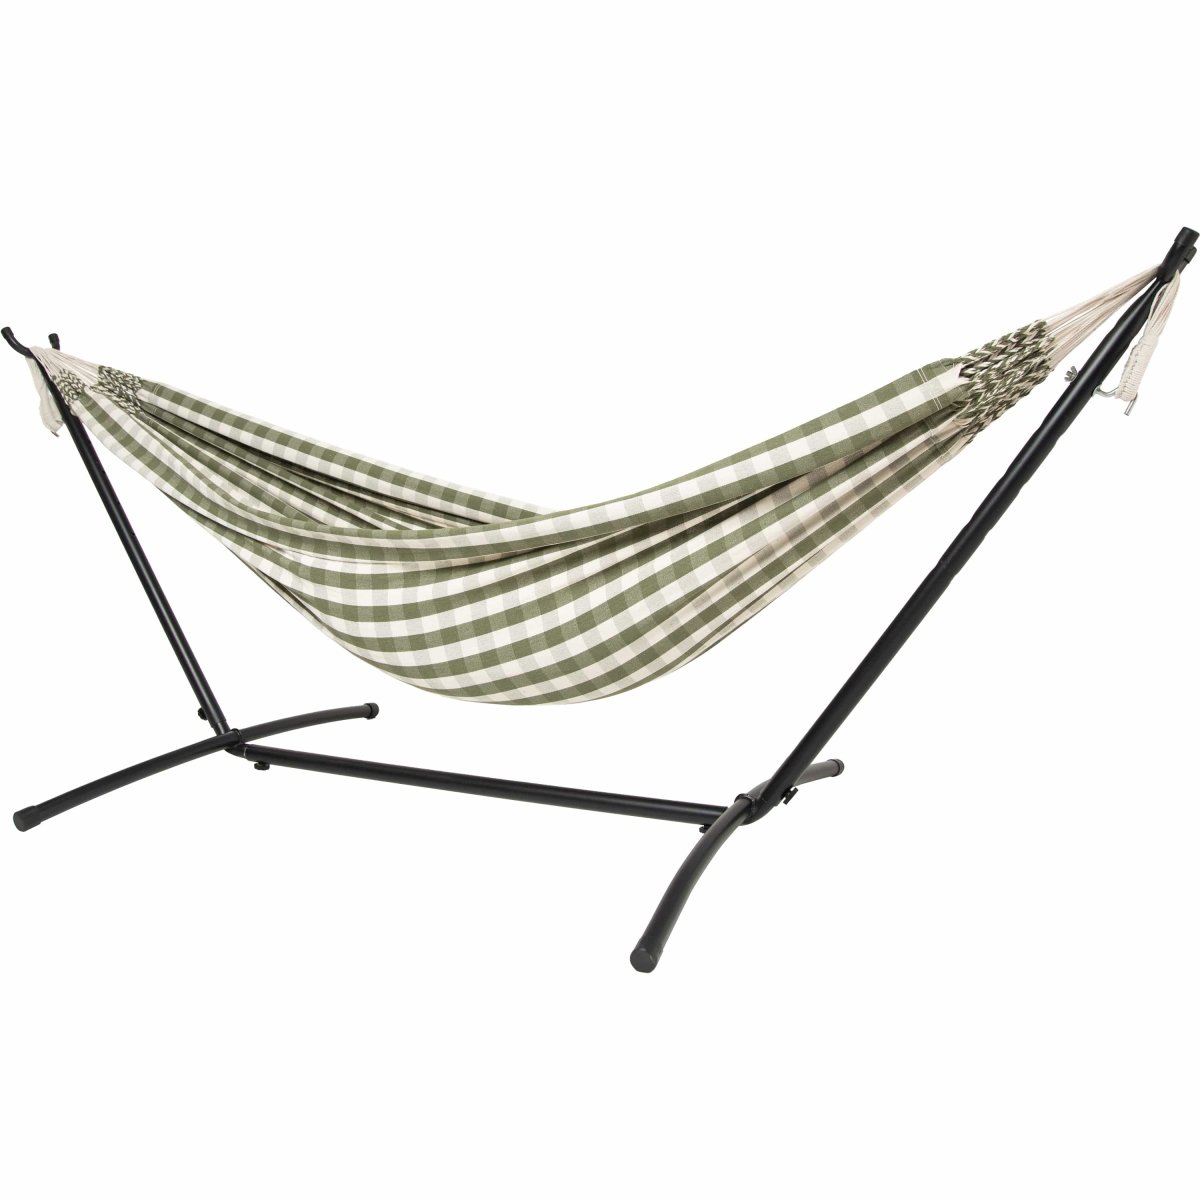 10ft Black Universal Steel Hammock Stand & Authentic Double Vichy Hammock in Urban Olive - Outdoorium